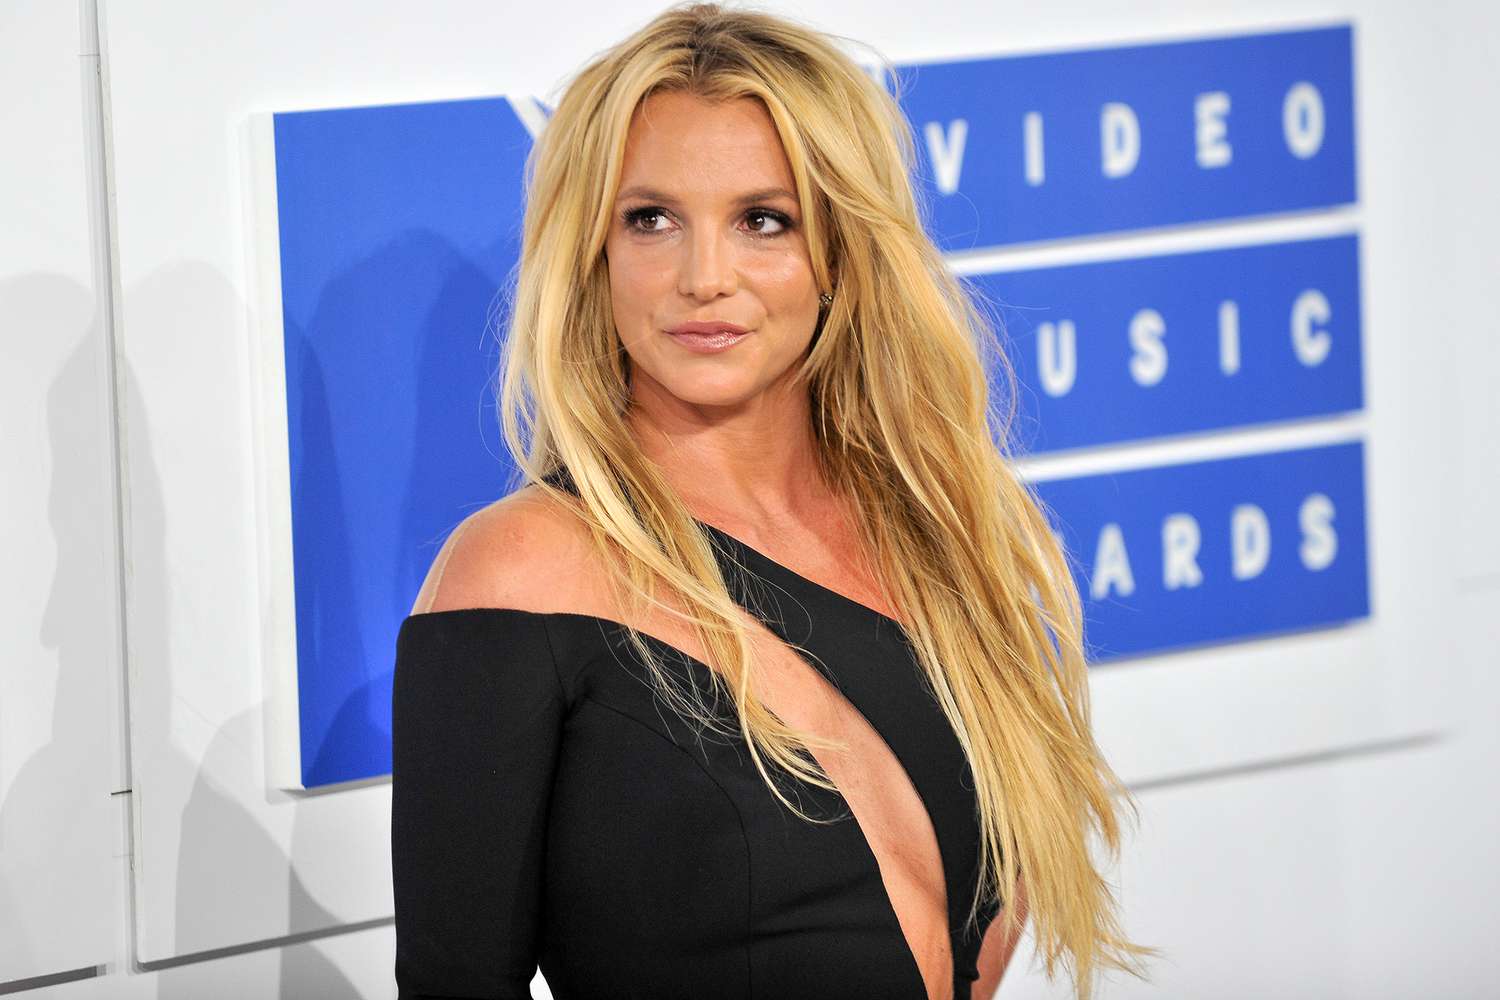 Britney Spears Posts Video of ‘Twisted’ Ankle After Hotel Incident